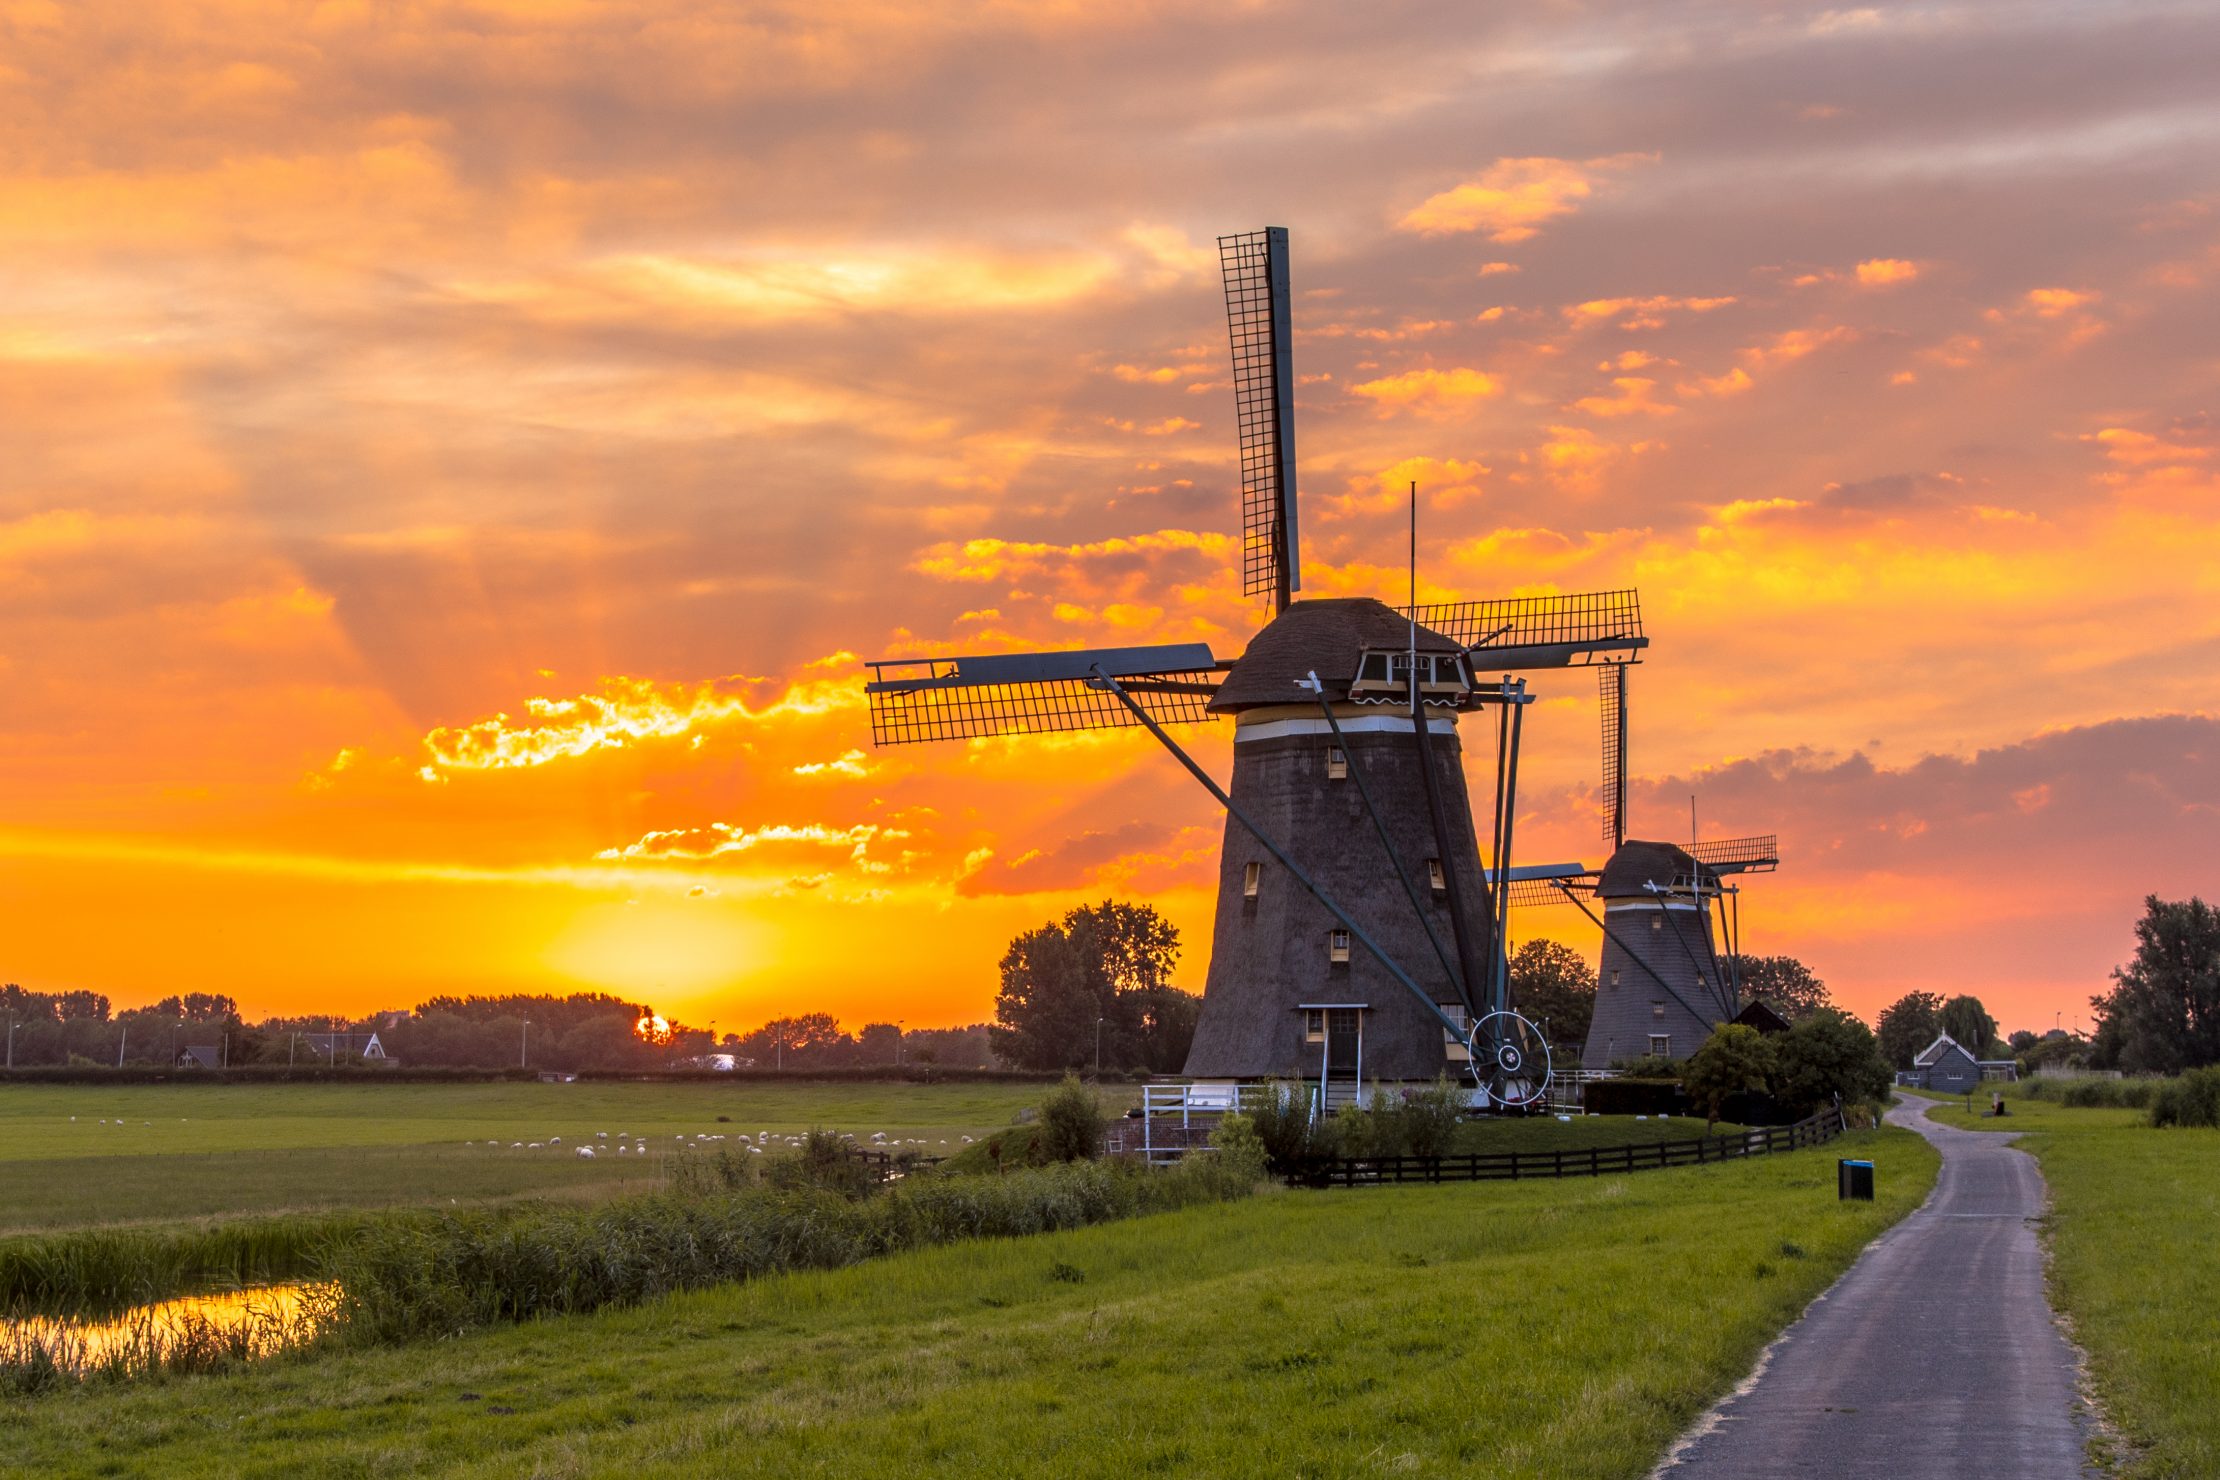 Windmills - typical Dutch countryside